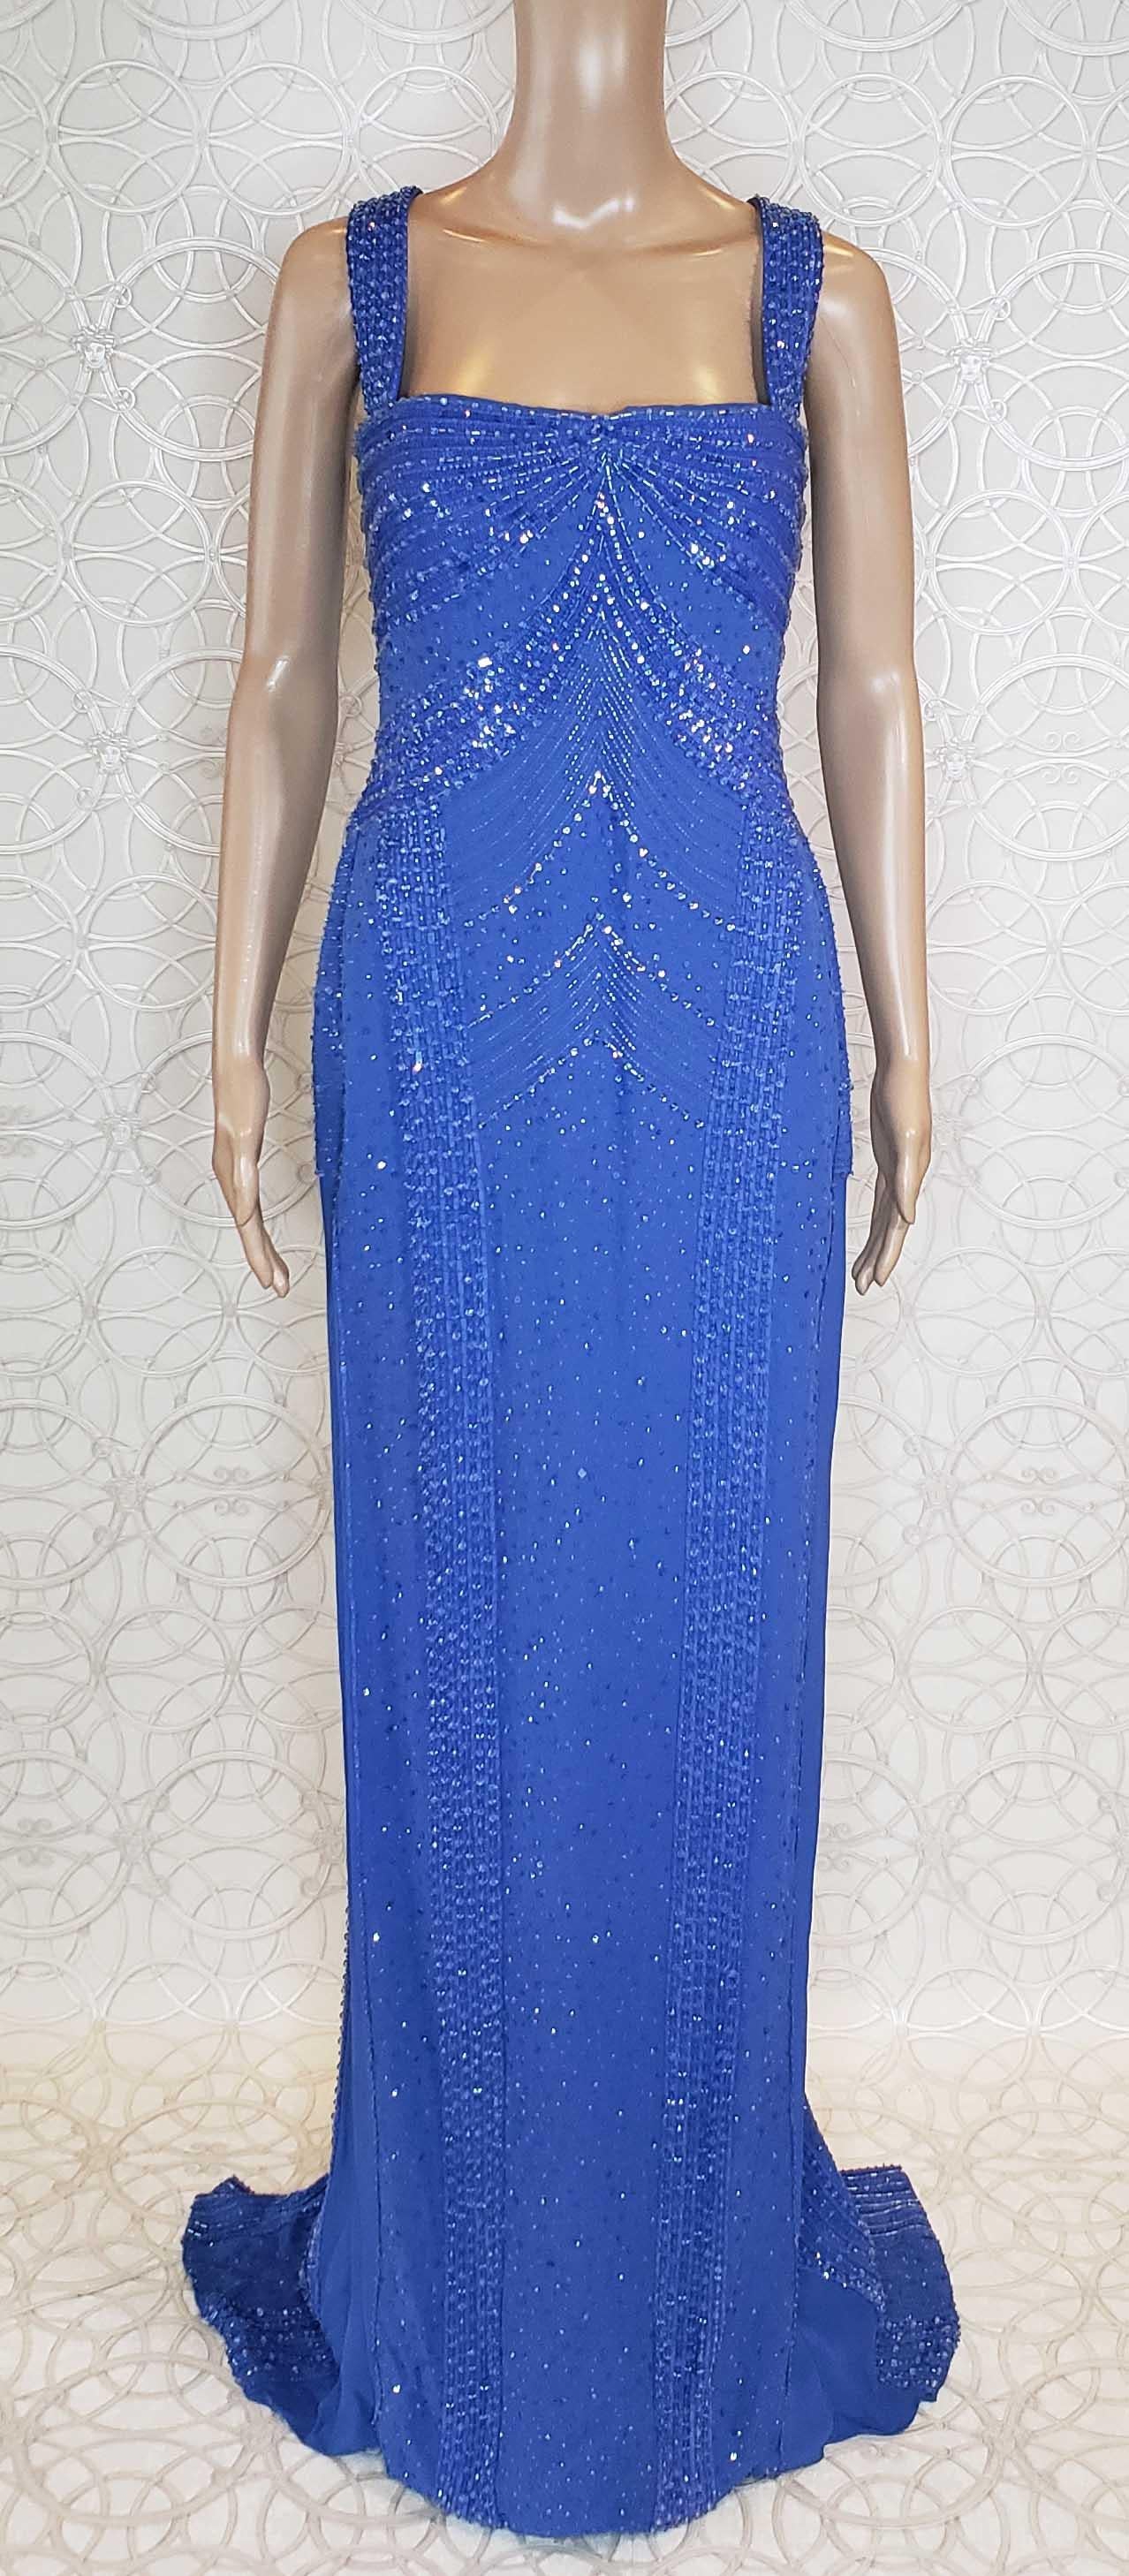 Women's $12, 575 NEW VERSACE EMBELLISHED BLUE Gown 44 - 8